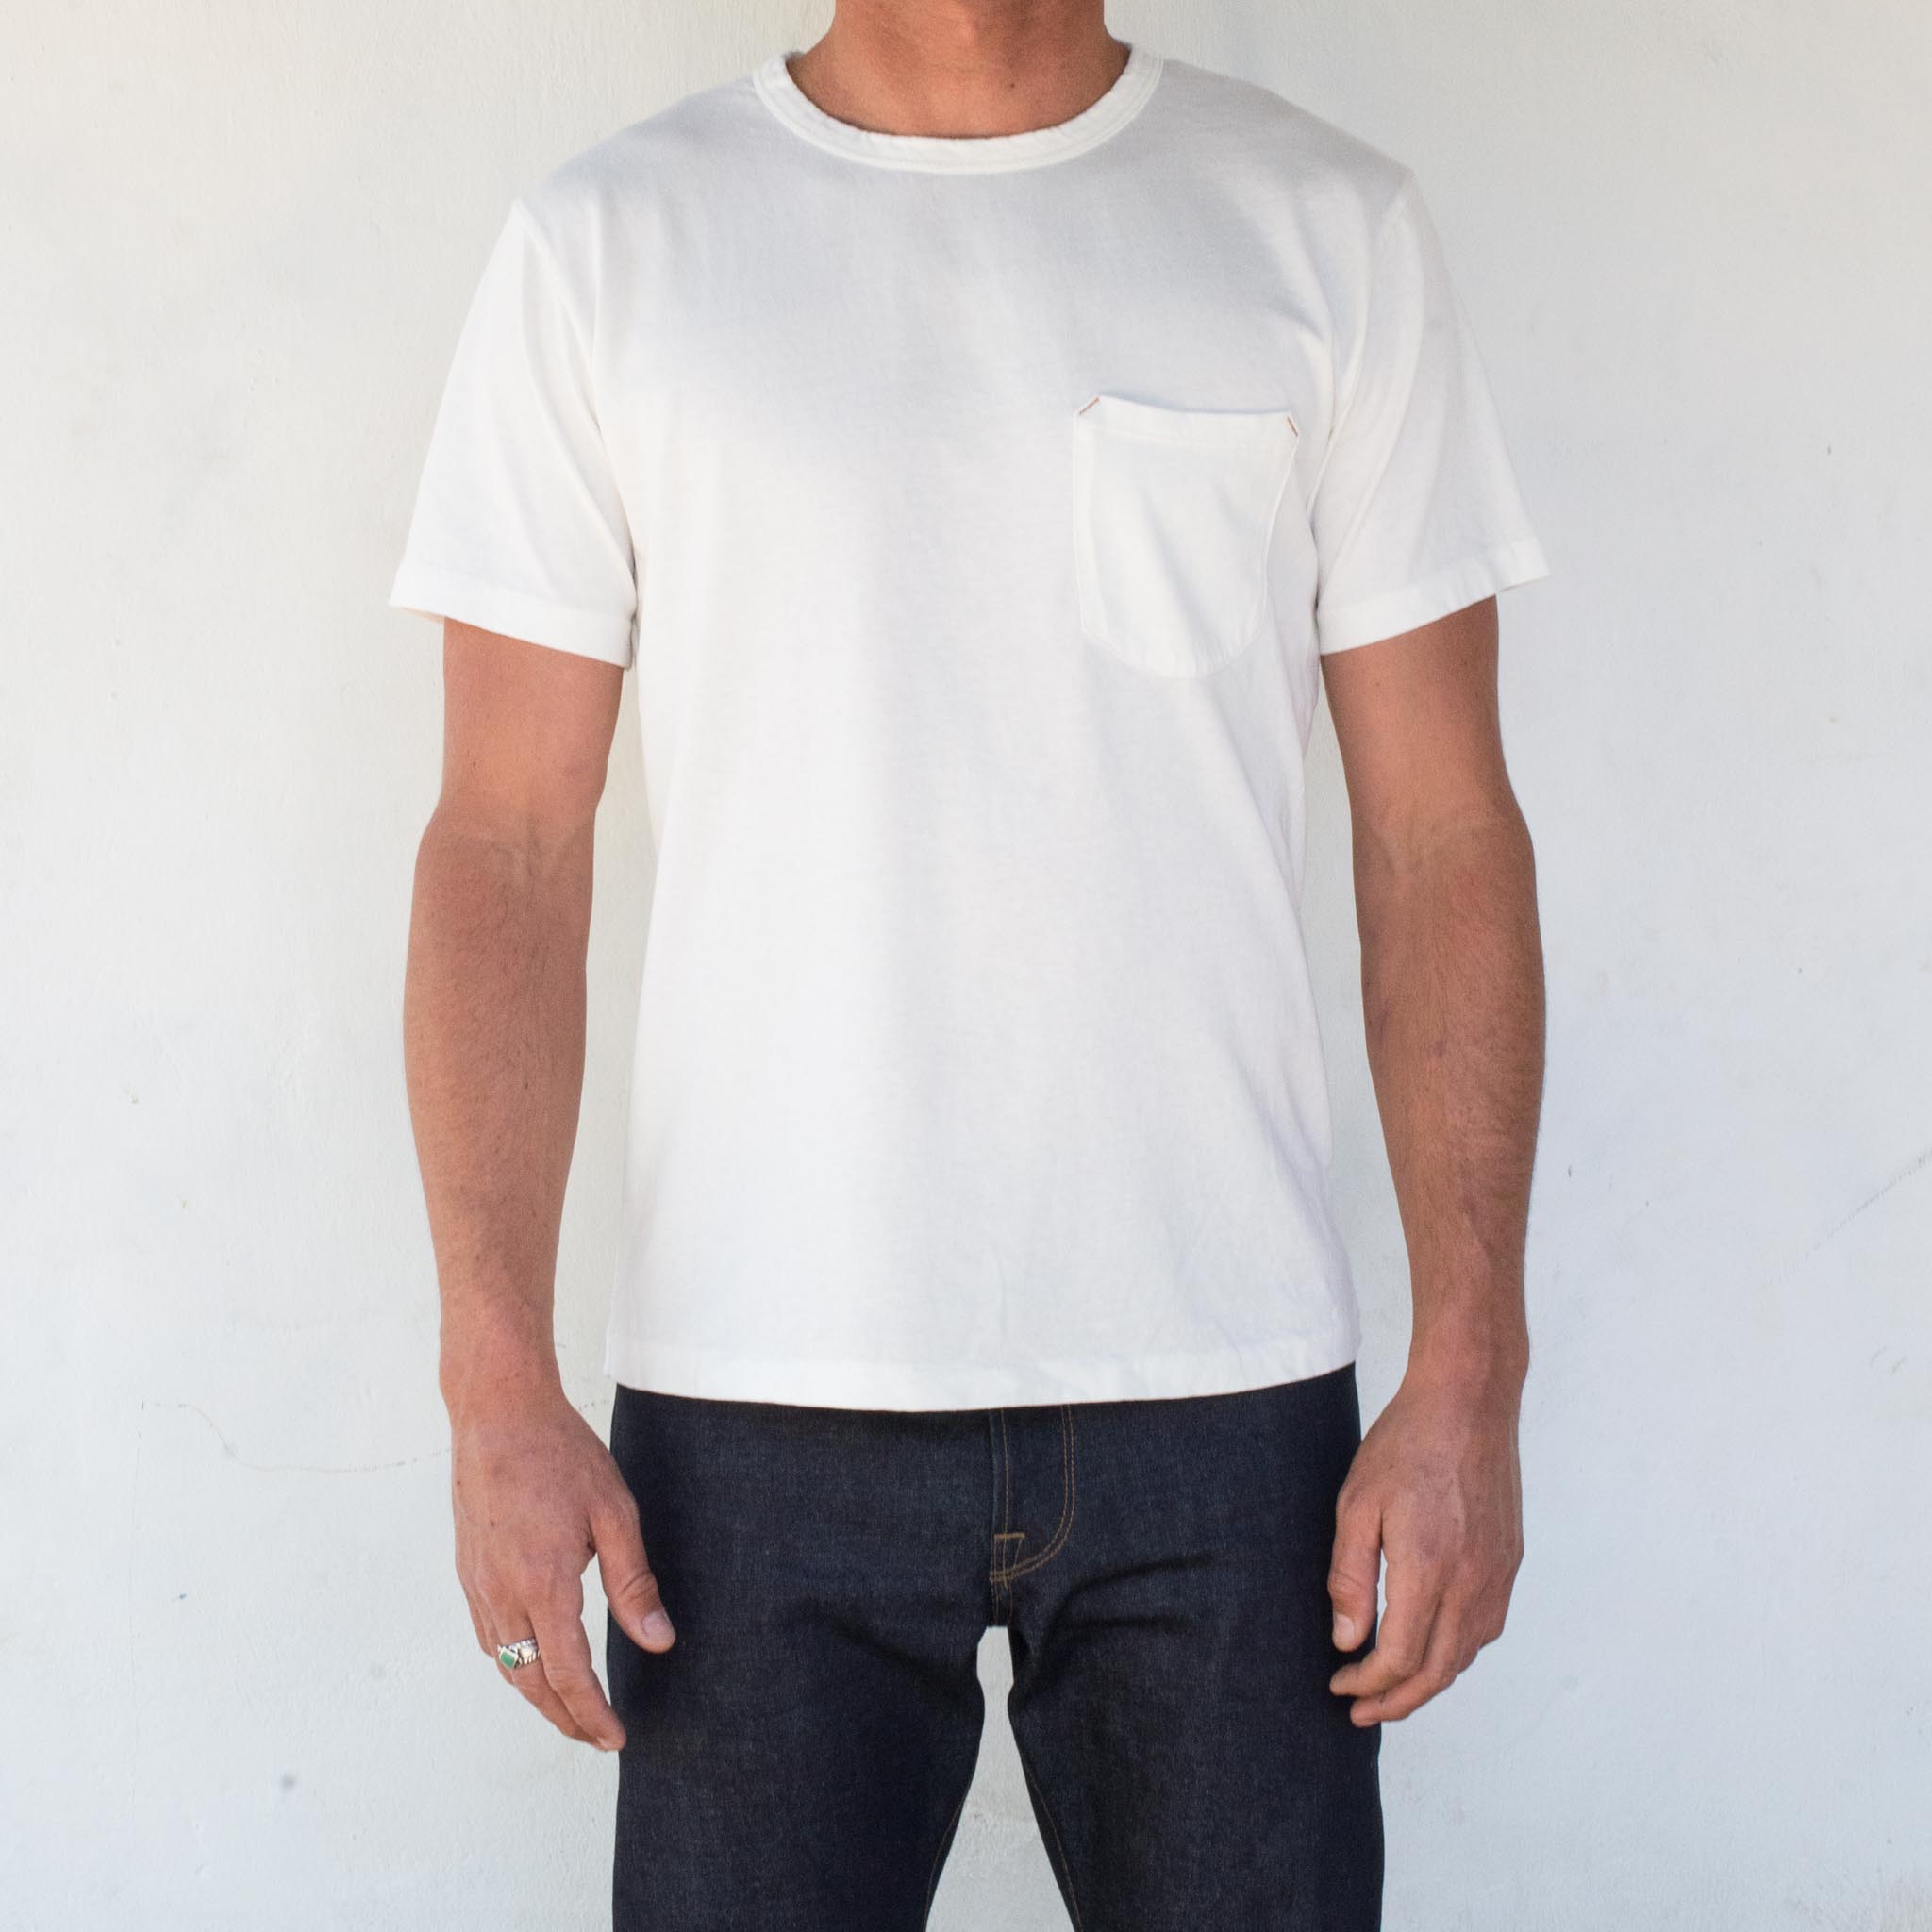 NWT Groceries Apparel Willy Tee No-bleach White S